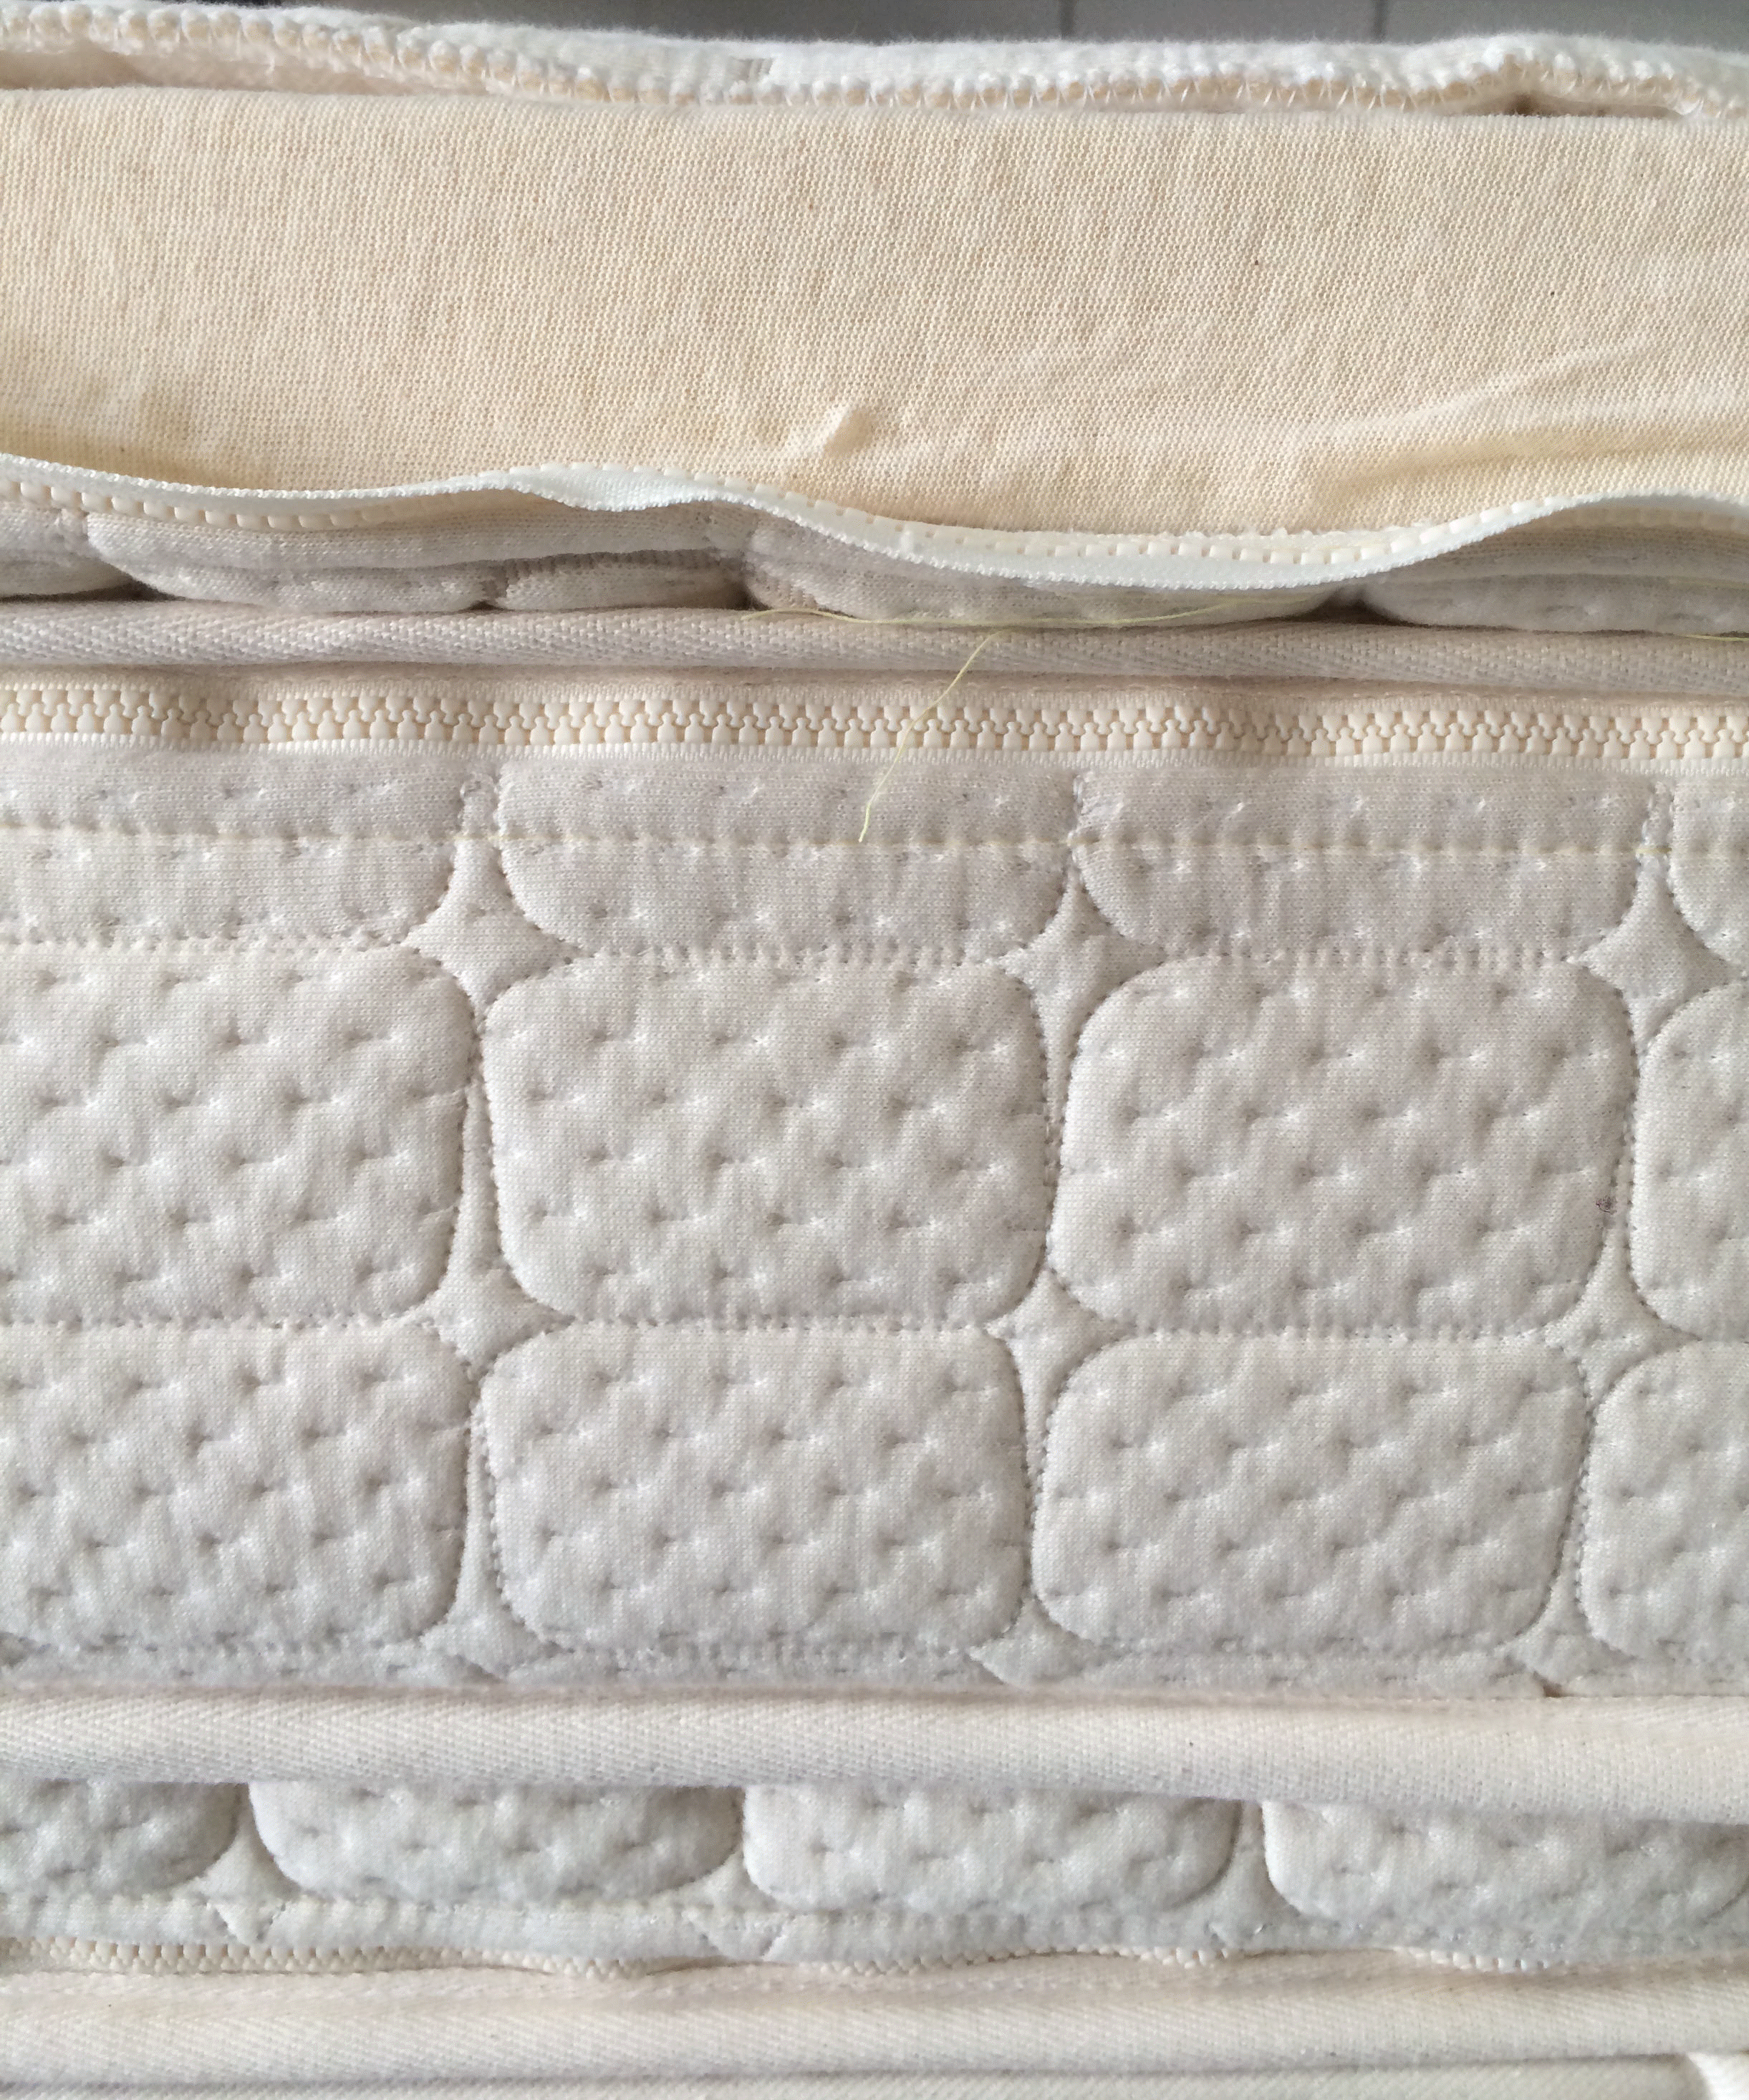 The organic Latex Mattress best quality highest rated